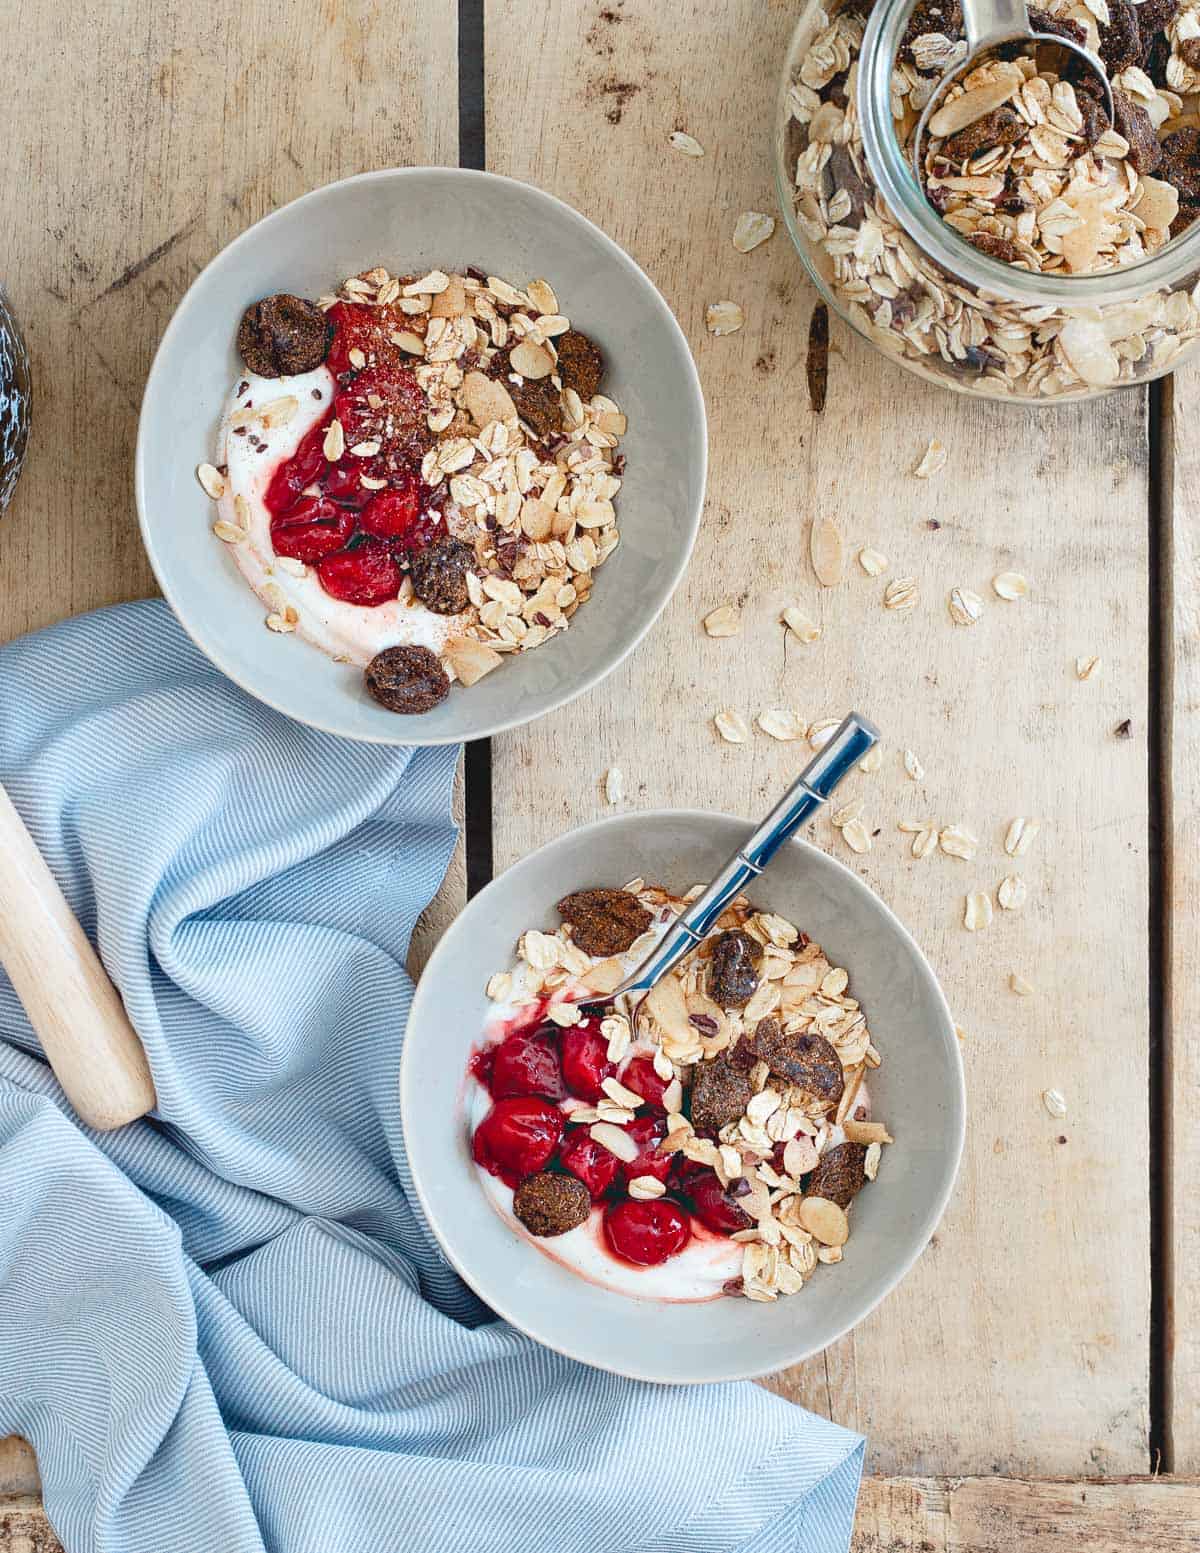 When you're craving sweet for breakfast but still want something healthy and nutritious, these tart cherry ginger muesli yogurt bowls are perfect!